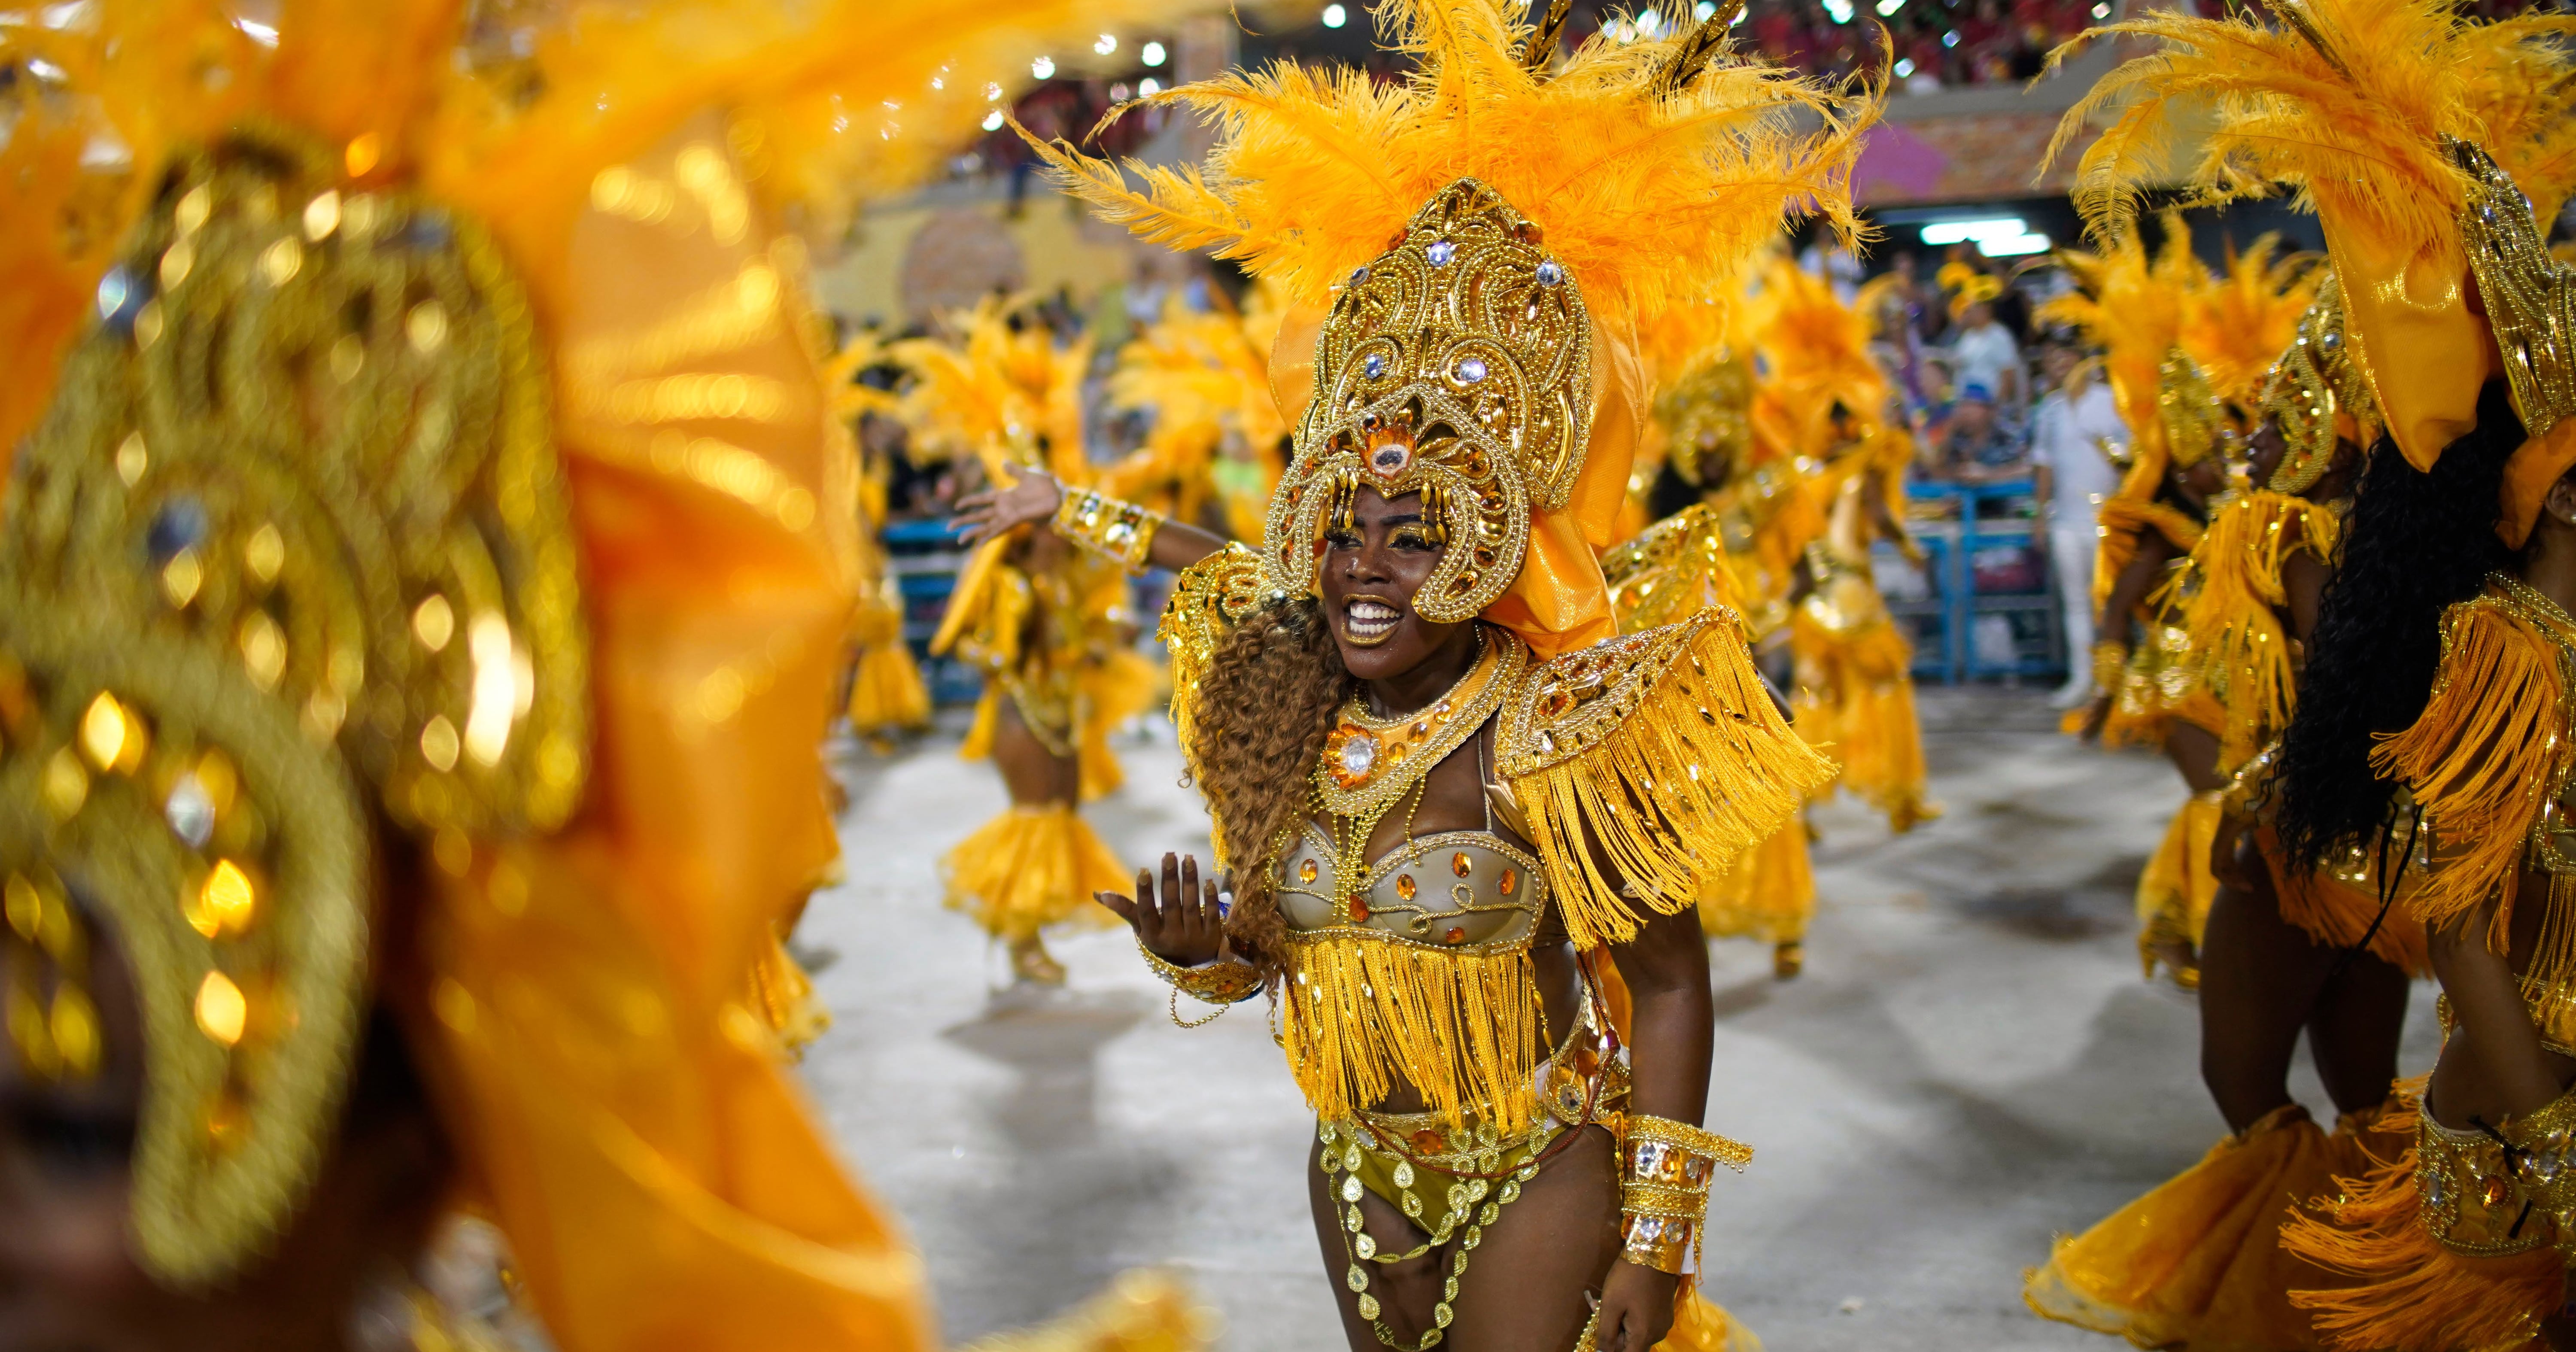 Brazil Carnival 2019: Inspirational colourful costumes, in pictures